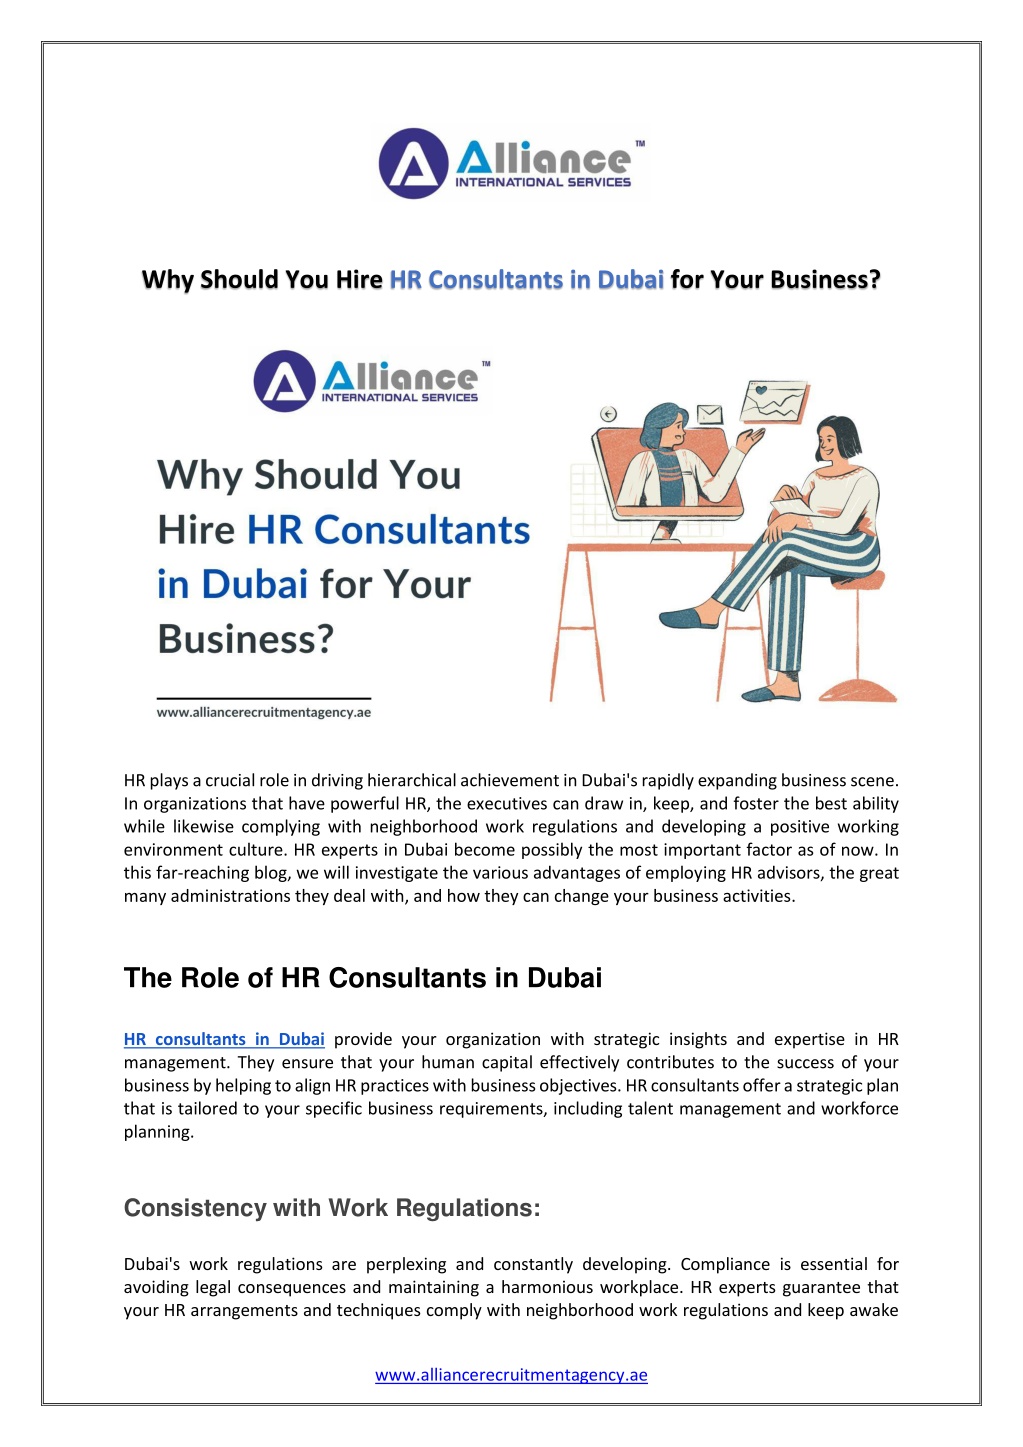 why should you hire hr consultants in dubai l.w